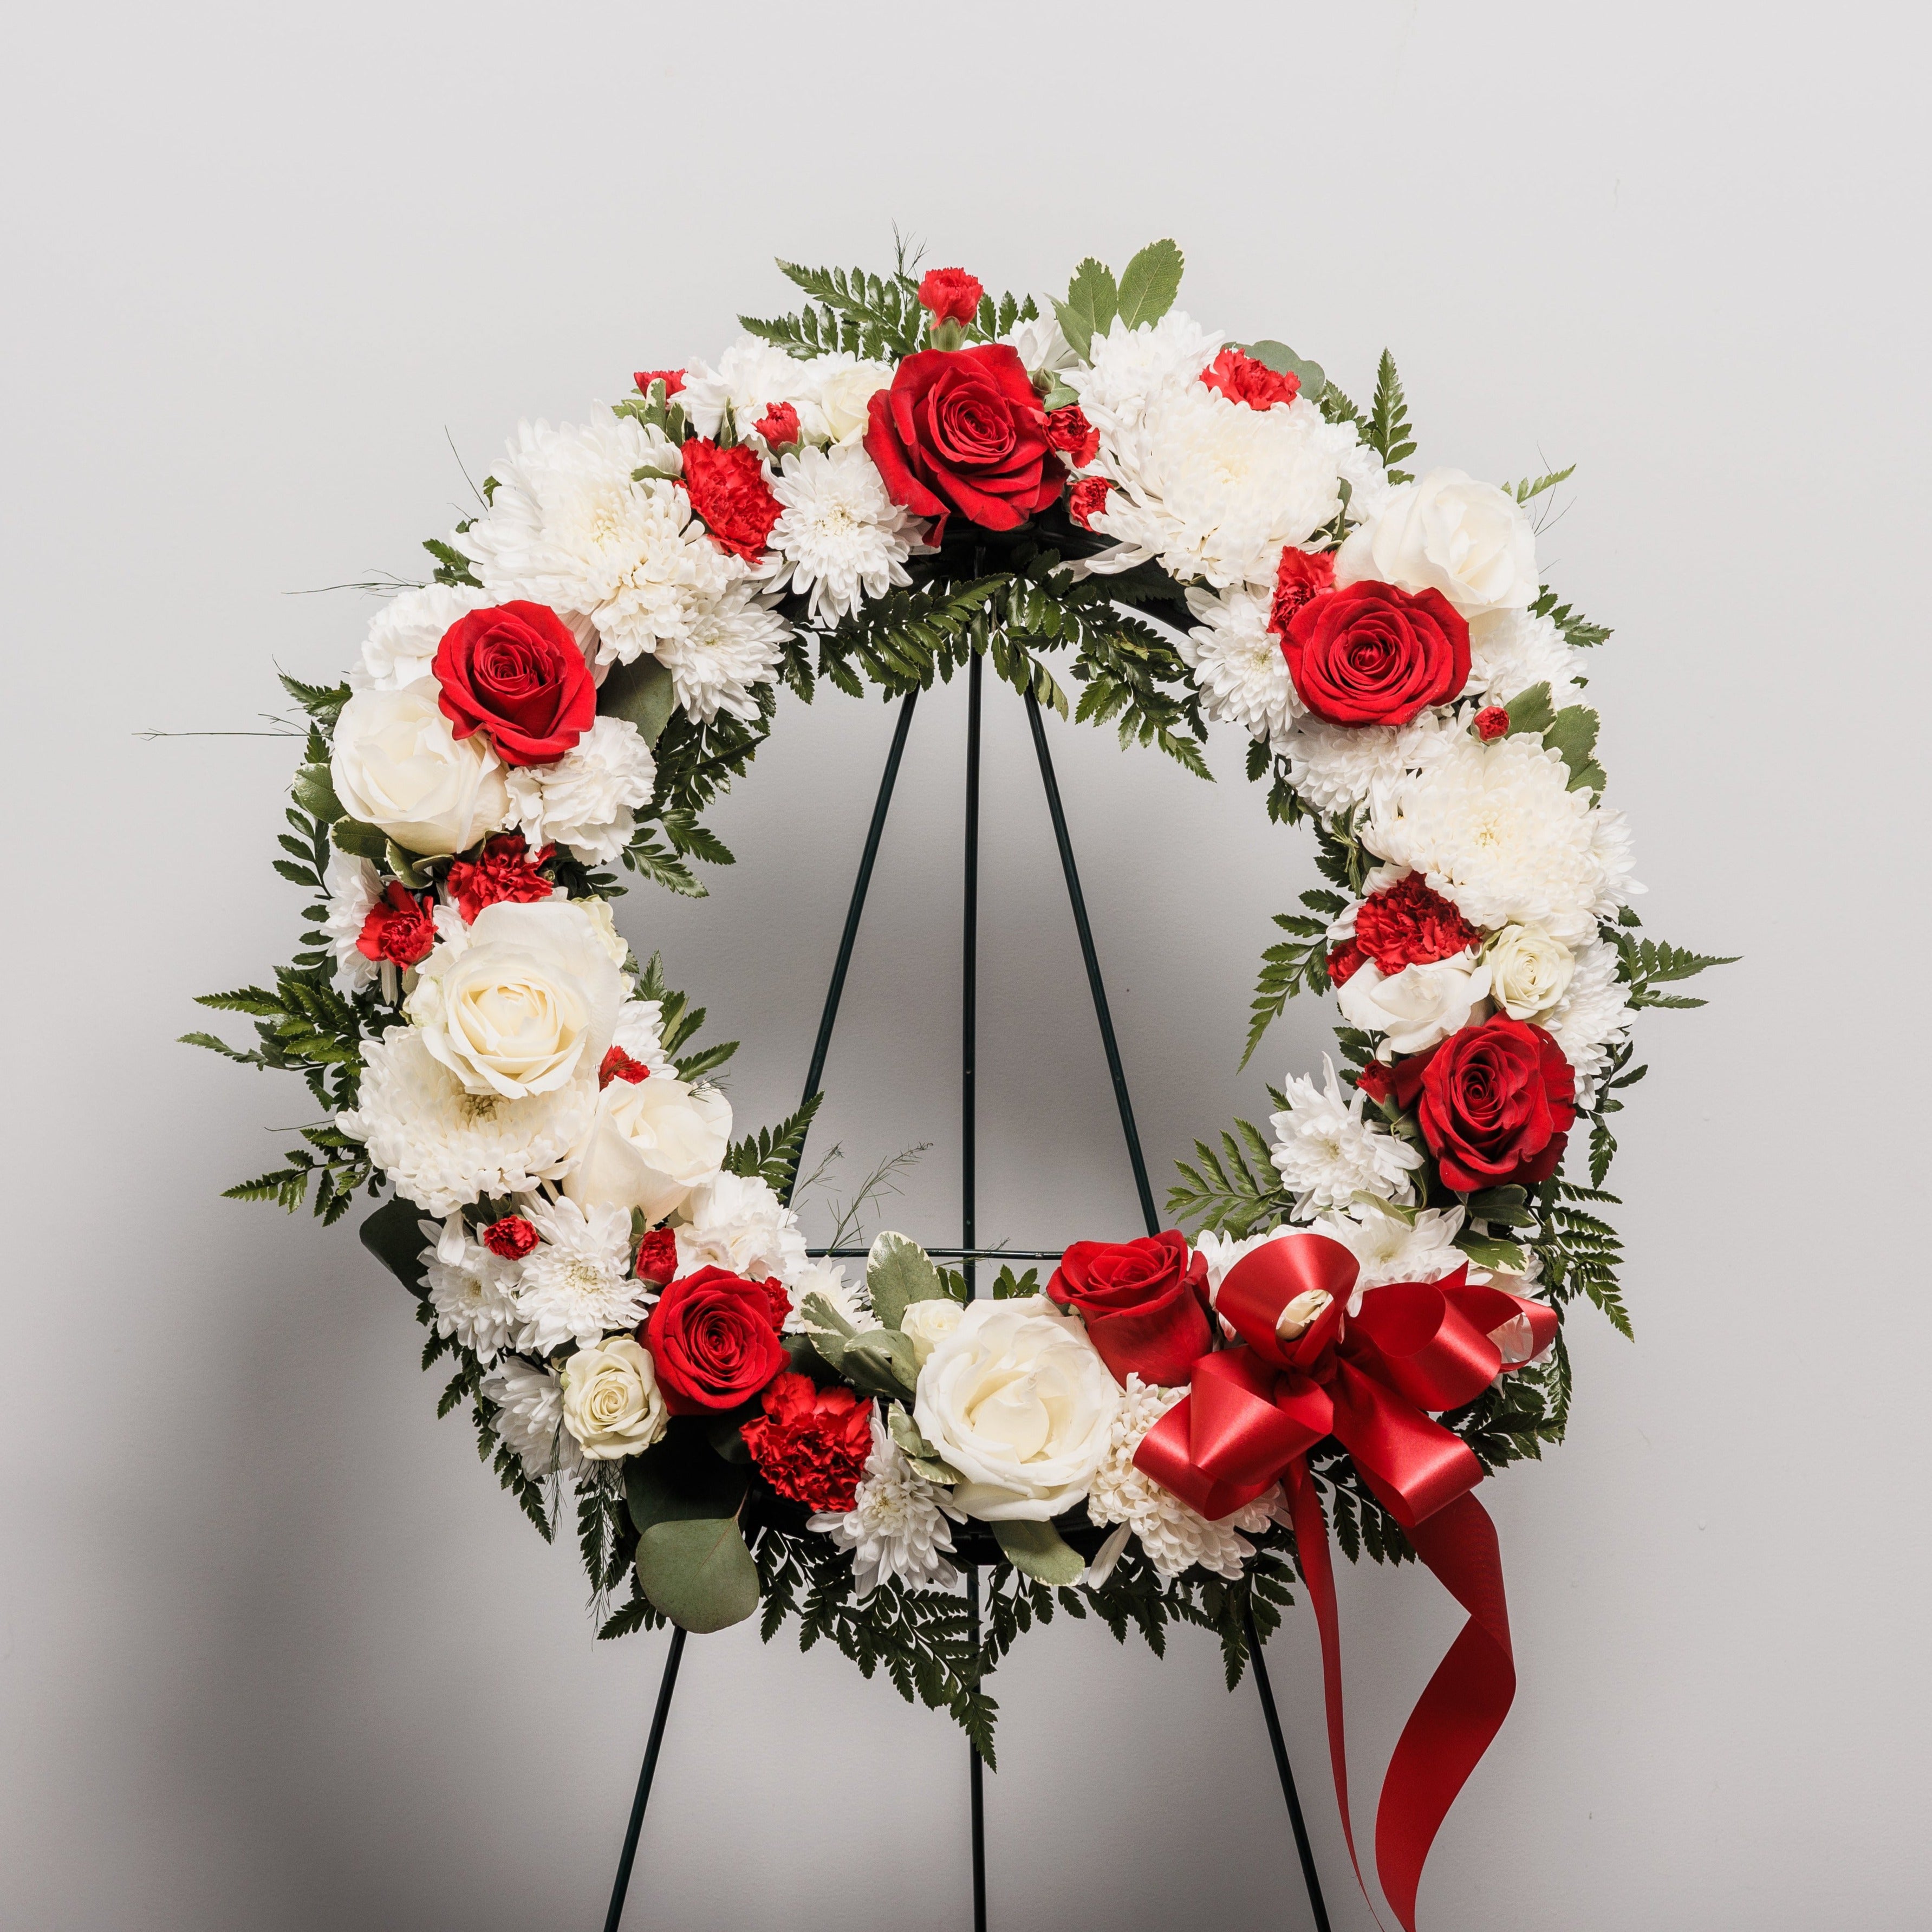 A wreath standing spray with white flowers and red roses.